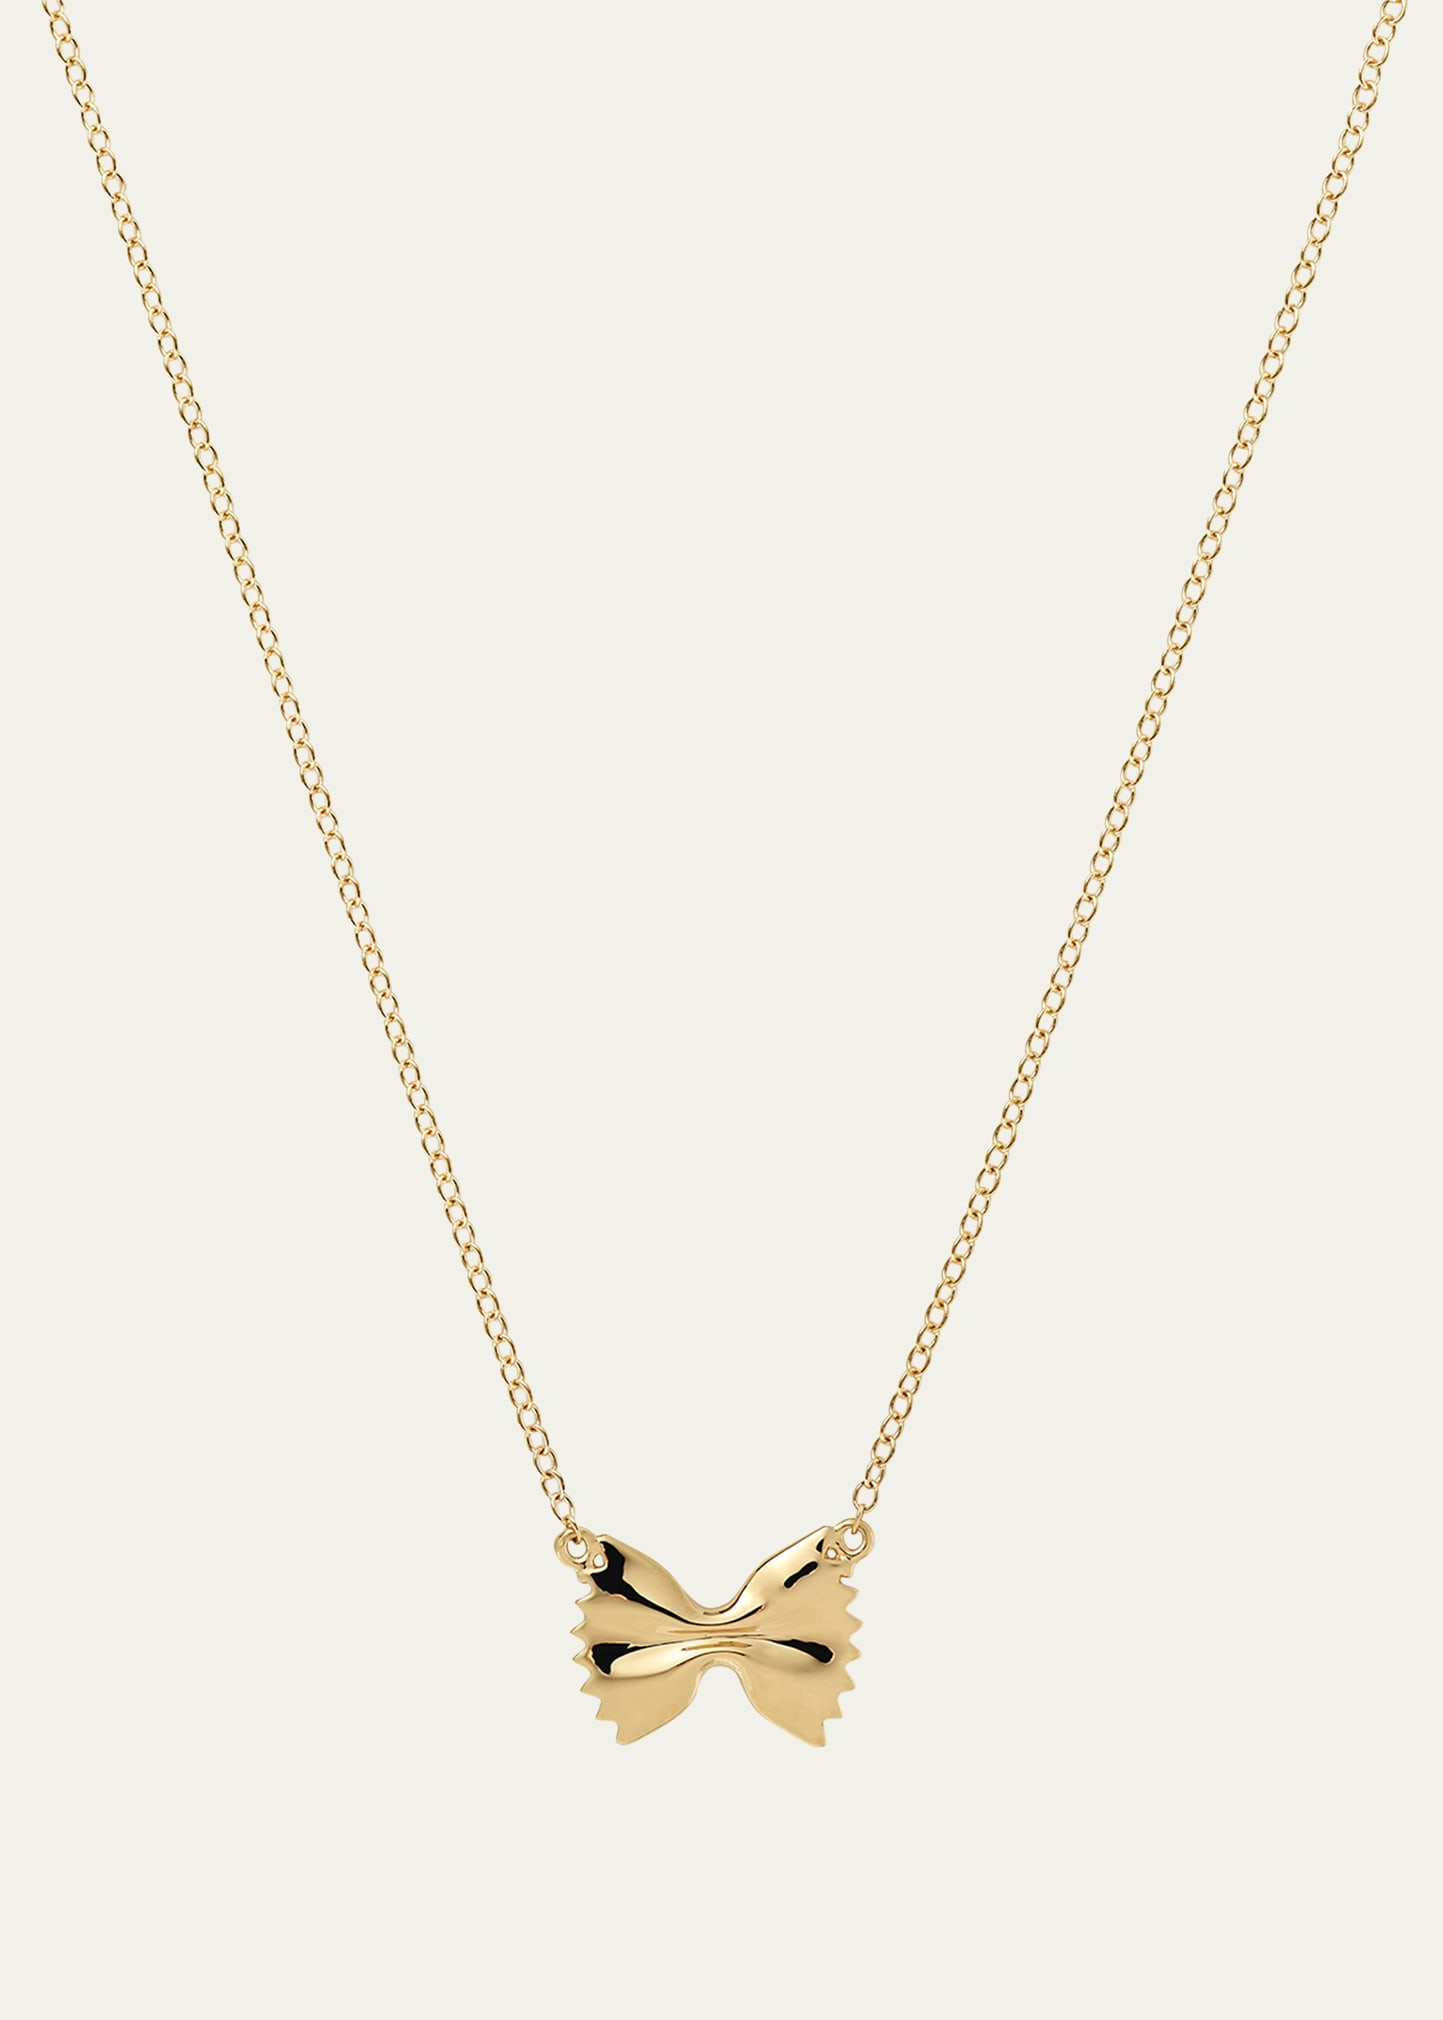 14K Yellow Gold Bowtie Pasta Station Necklace